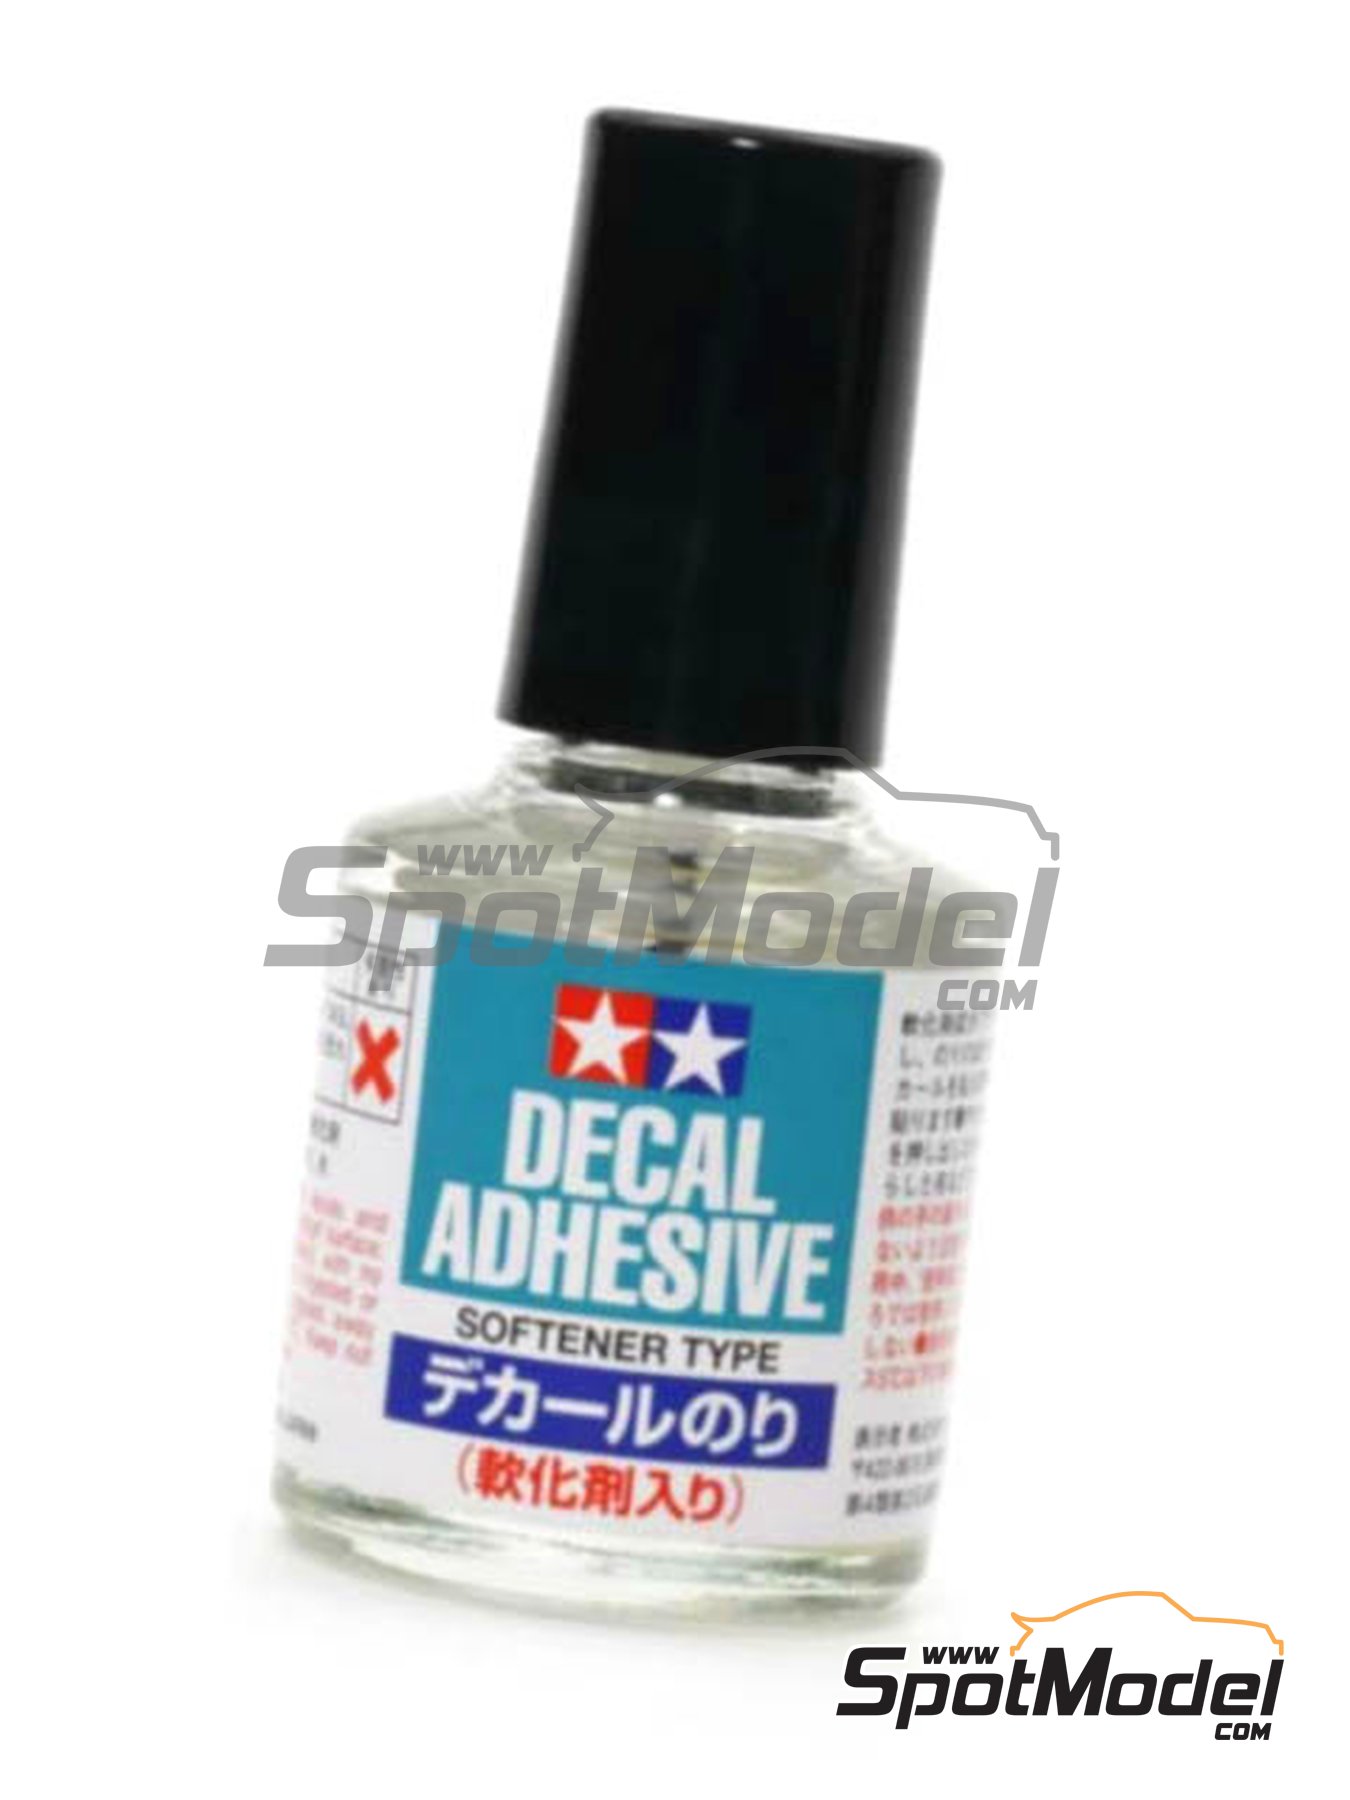 Decal Adhesive Softener Type - 1 x 10ml. Decal products manufactured by  Tamiya (ref. TAM87193, also 4950344871933 and 87193)